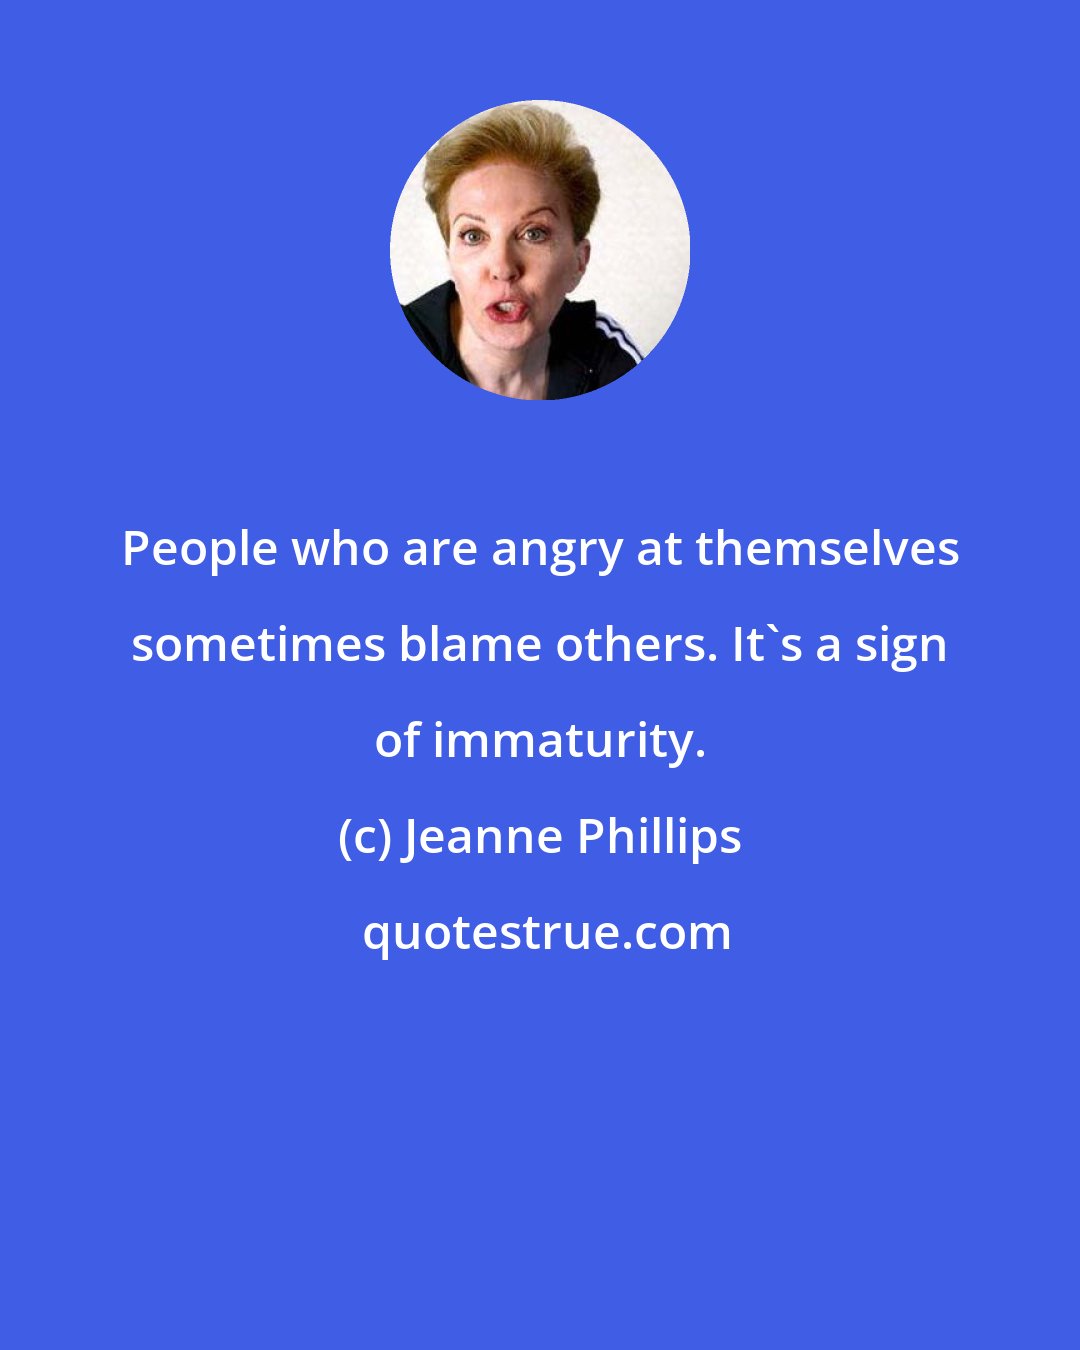 Jeanne Phillips: People who are angry at themselves sometimes blame others. It's a sign of immaturity.